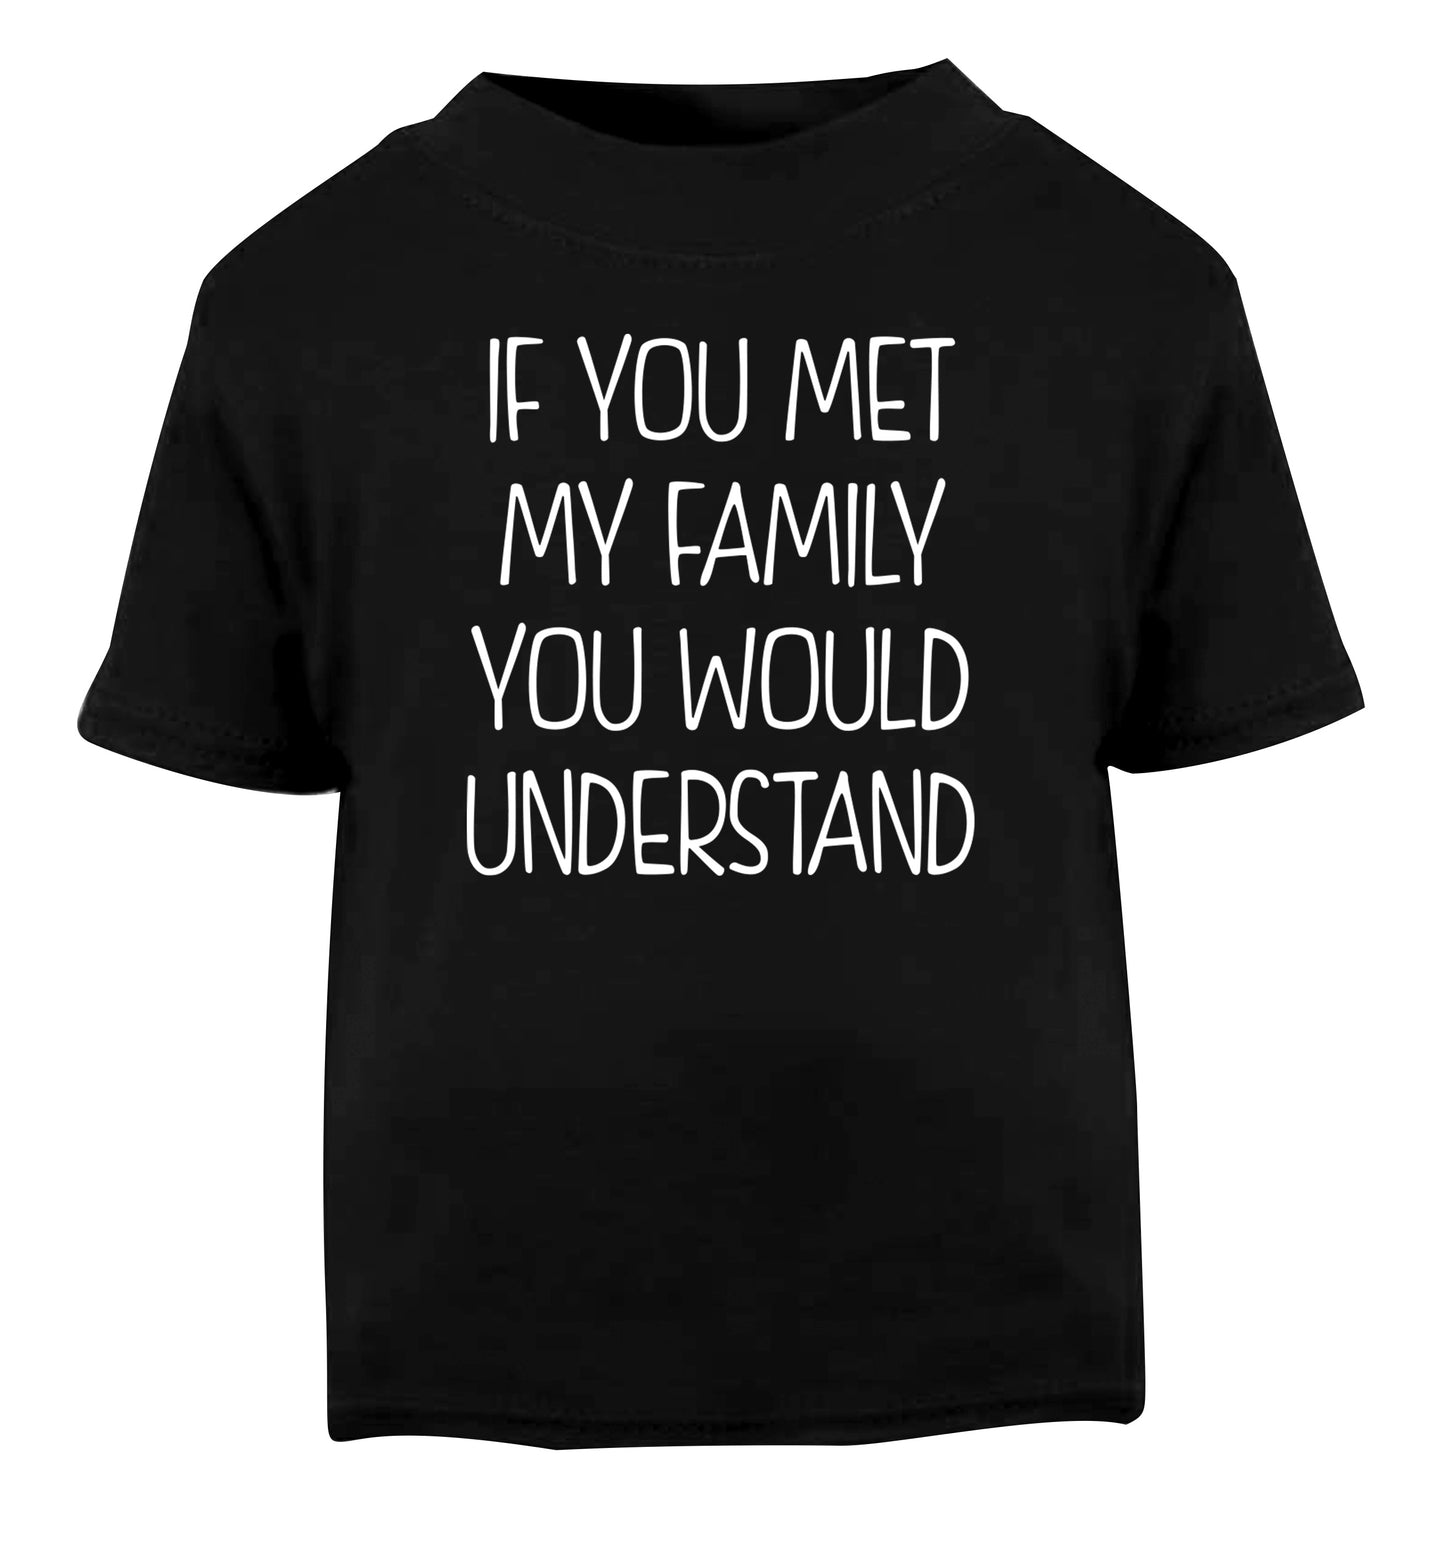 If you met my family you would understand Black Baby Toddler Tshirt 2 years